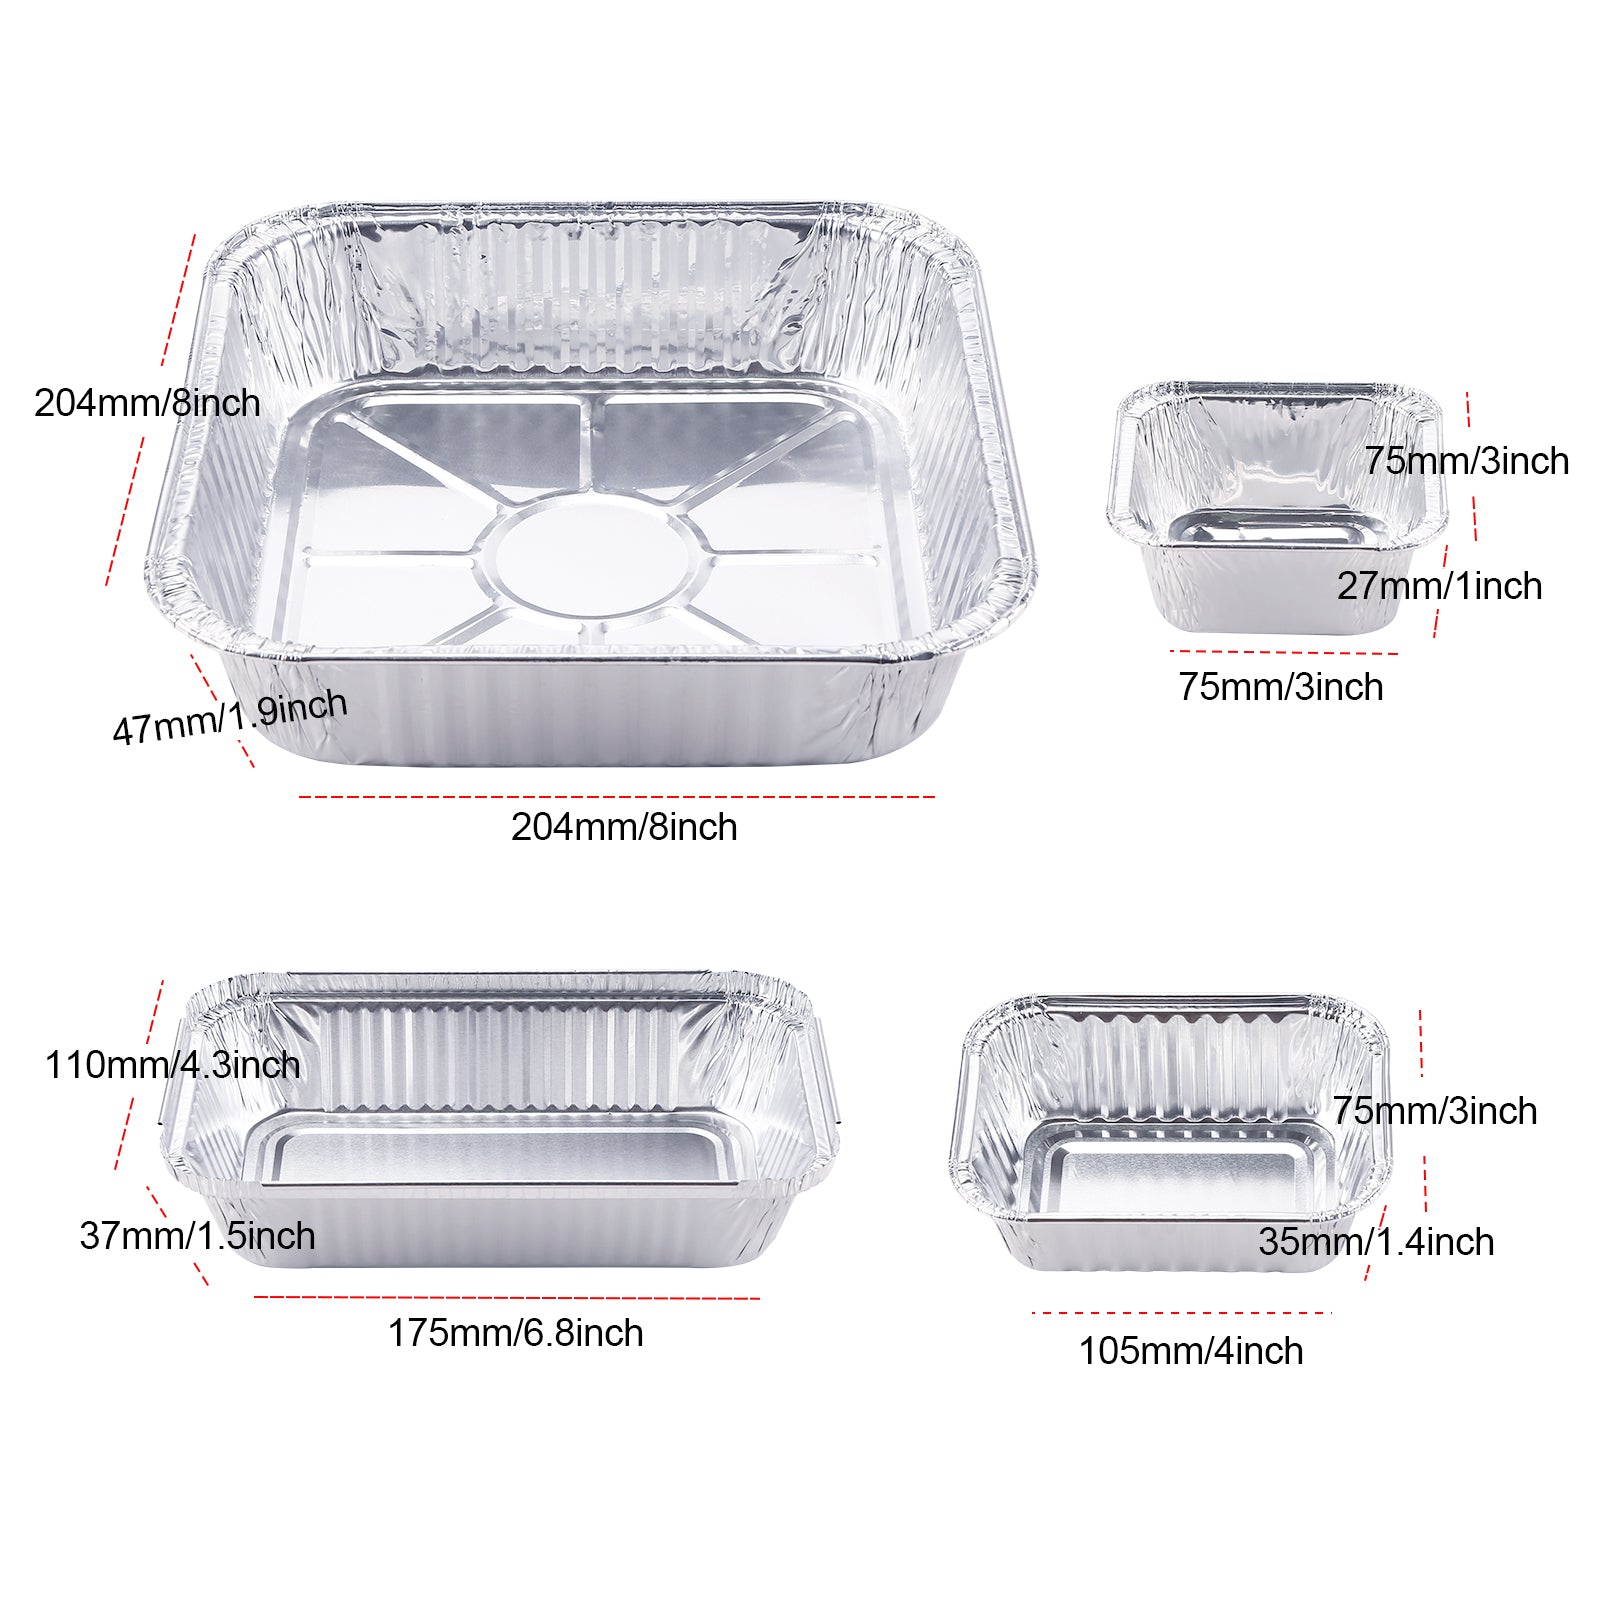 Disposable Aluminum Steam Table Pans for Roasting & More